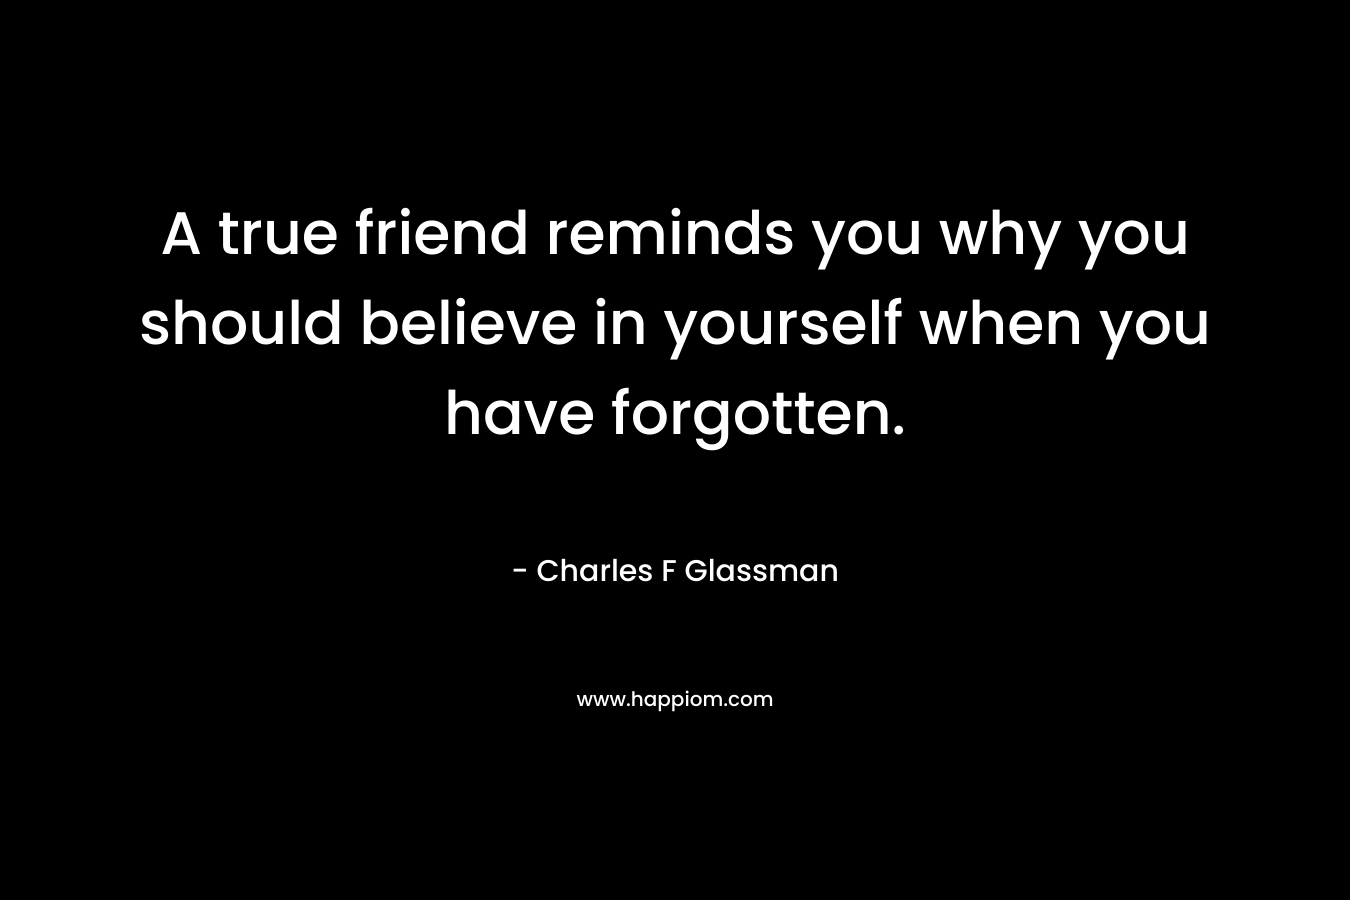 A true friend reminds you why you should believe in yourself when you have forgotten. – Charles F Glassman